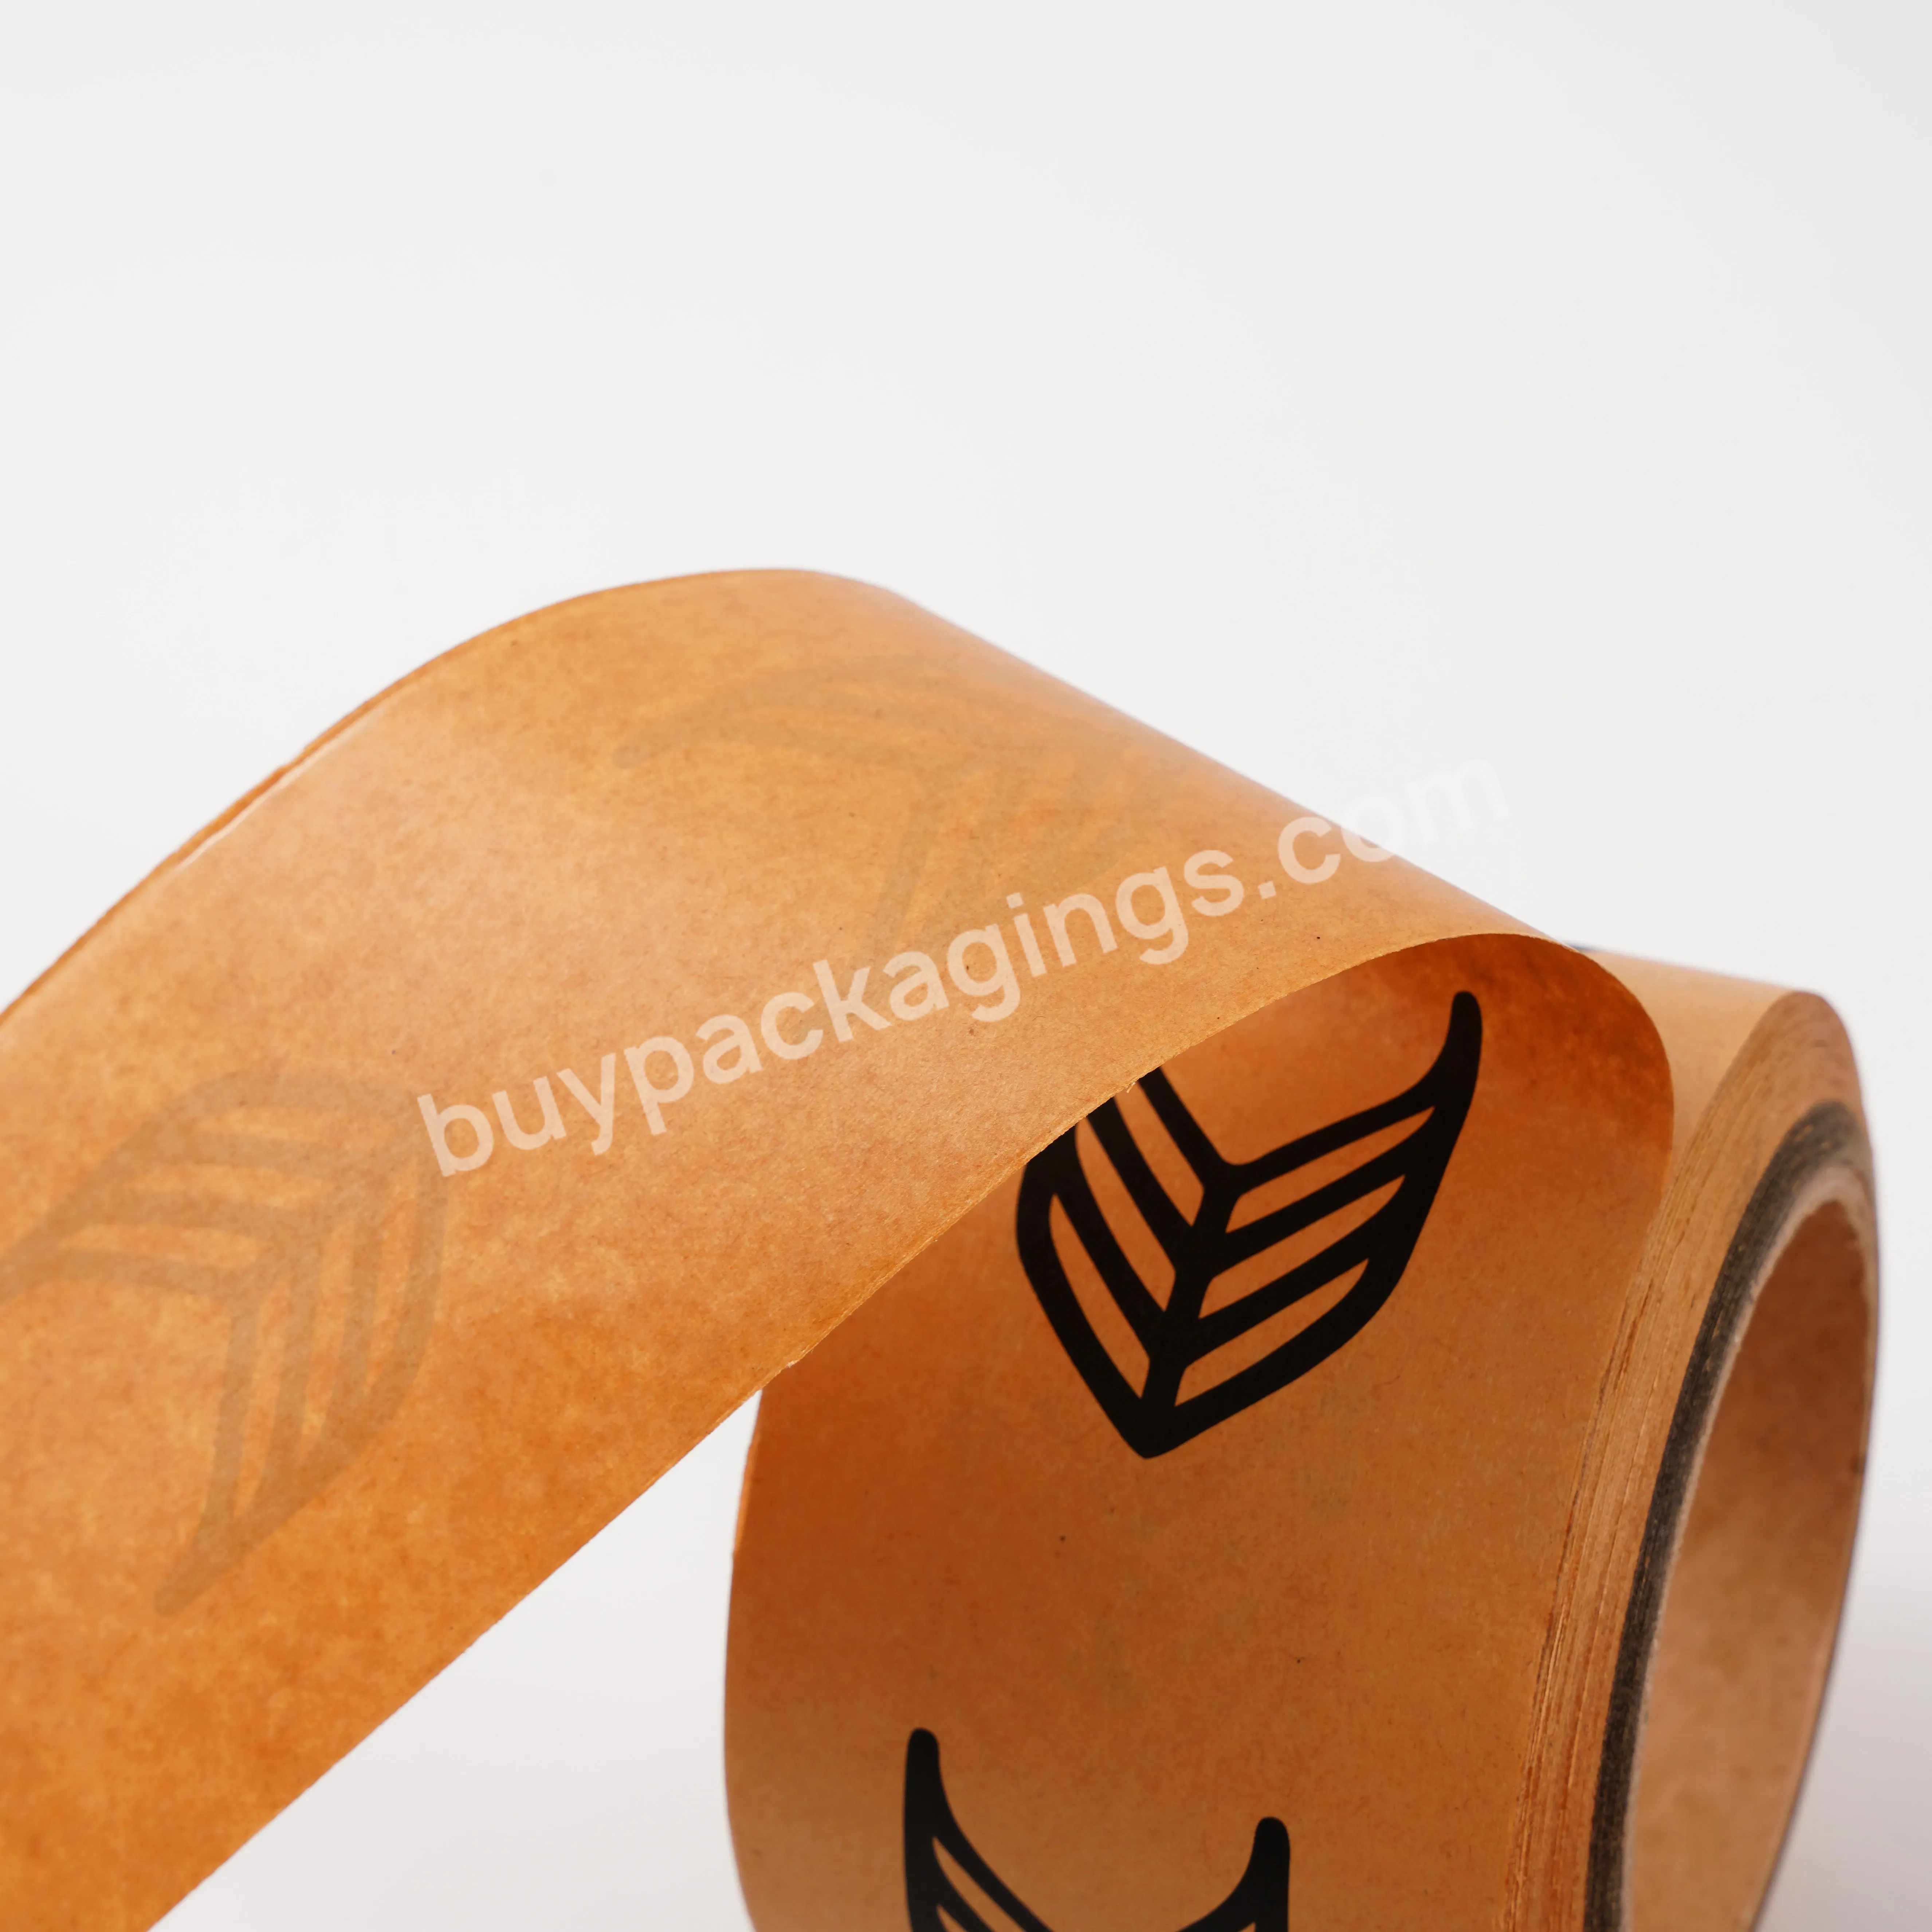 Can Be Customized With Any Logo And Printed With Kraft Paper Tape For Packaging And Sealing